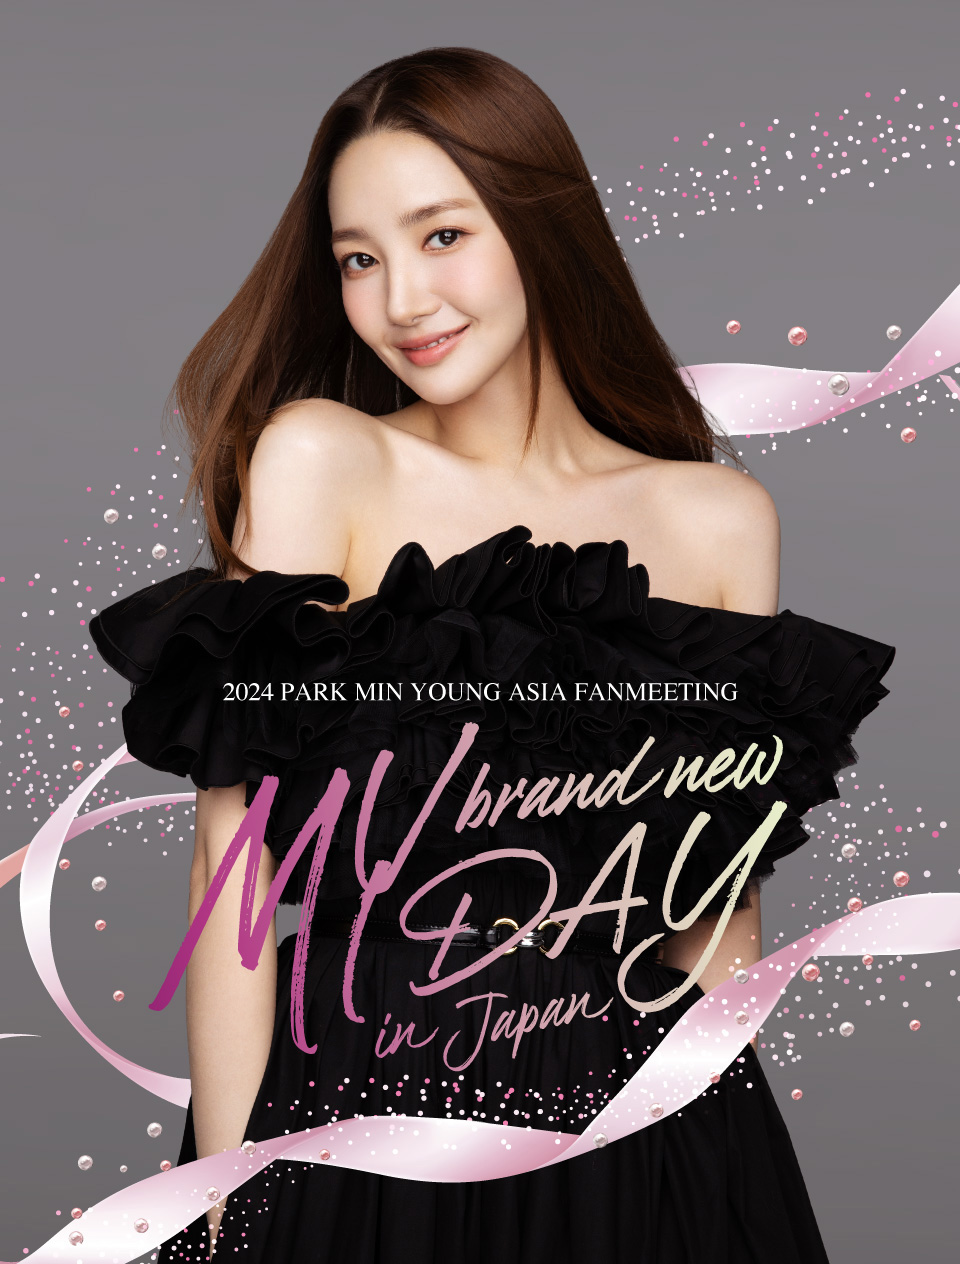 2024 PARK MIN YOUNG FANMEETING 